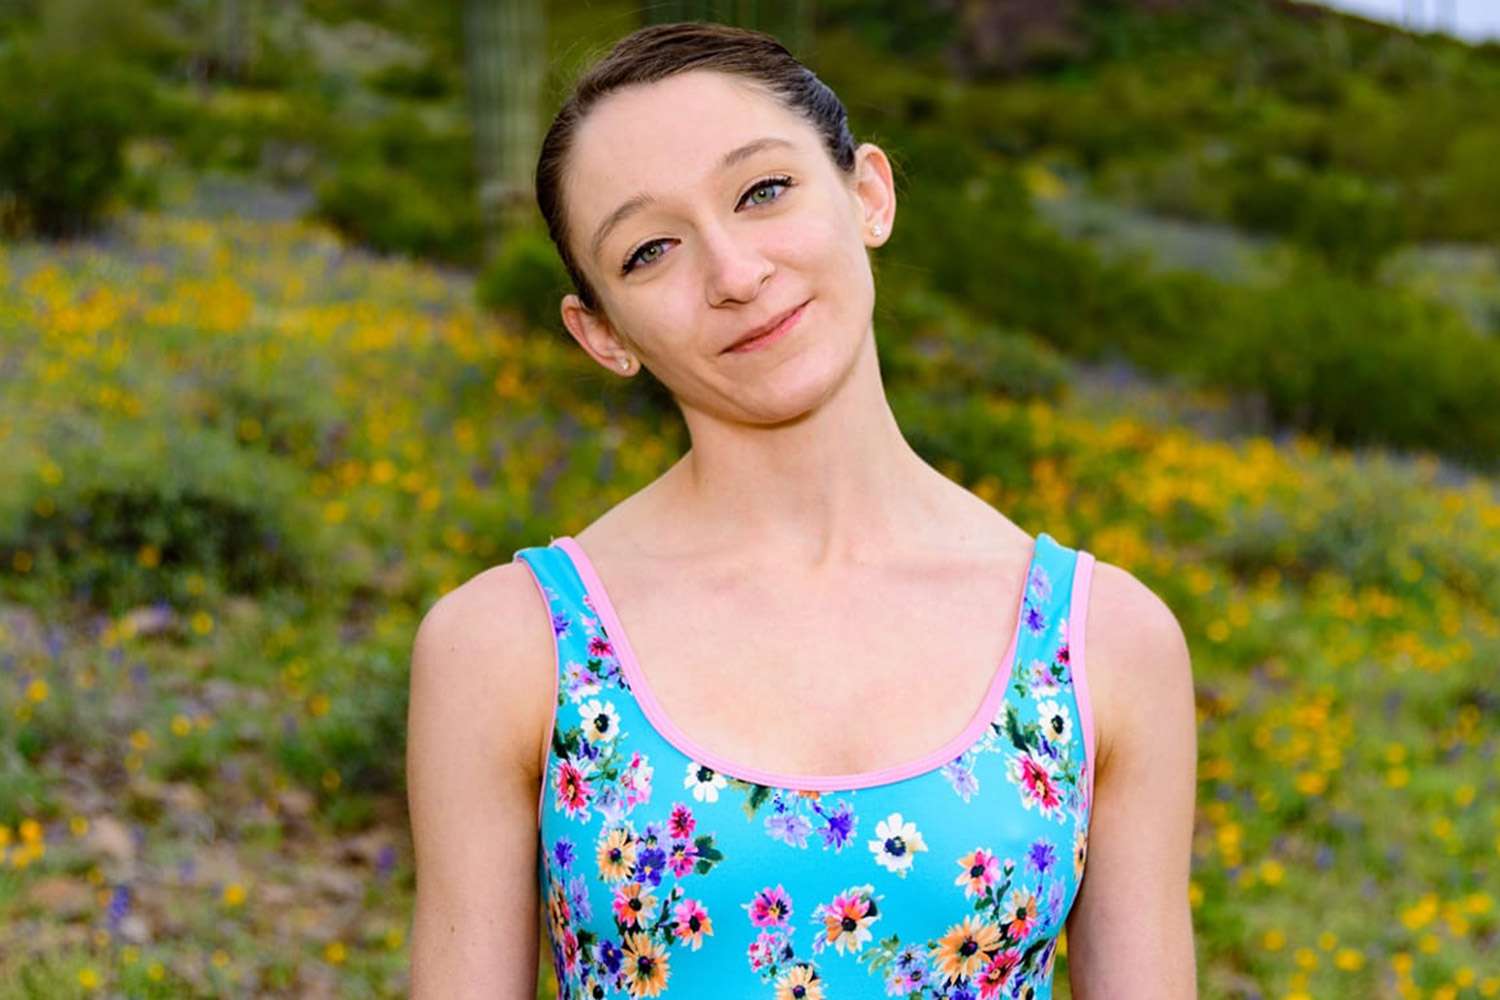 Professional Ballerina Gunned Down by Husband Who Claims He Was 'Startled': Police